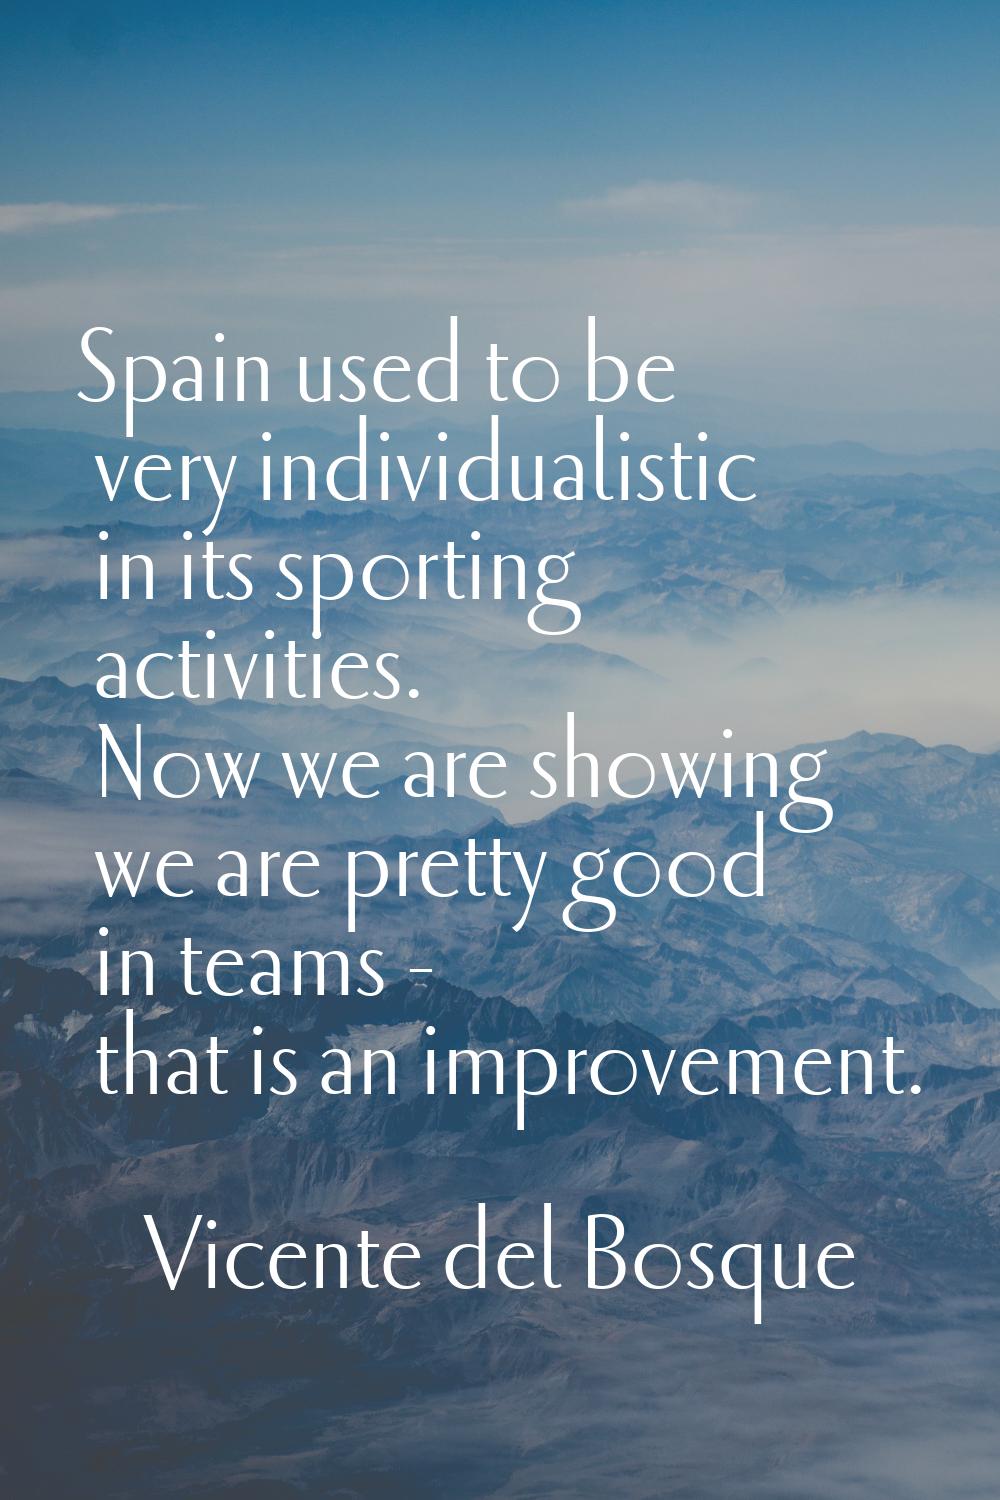 Spain used to be very individualistic in its sporting activities. Now we are showing we are pretty 